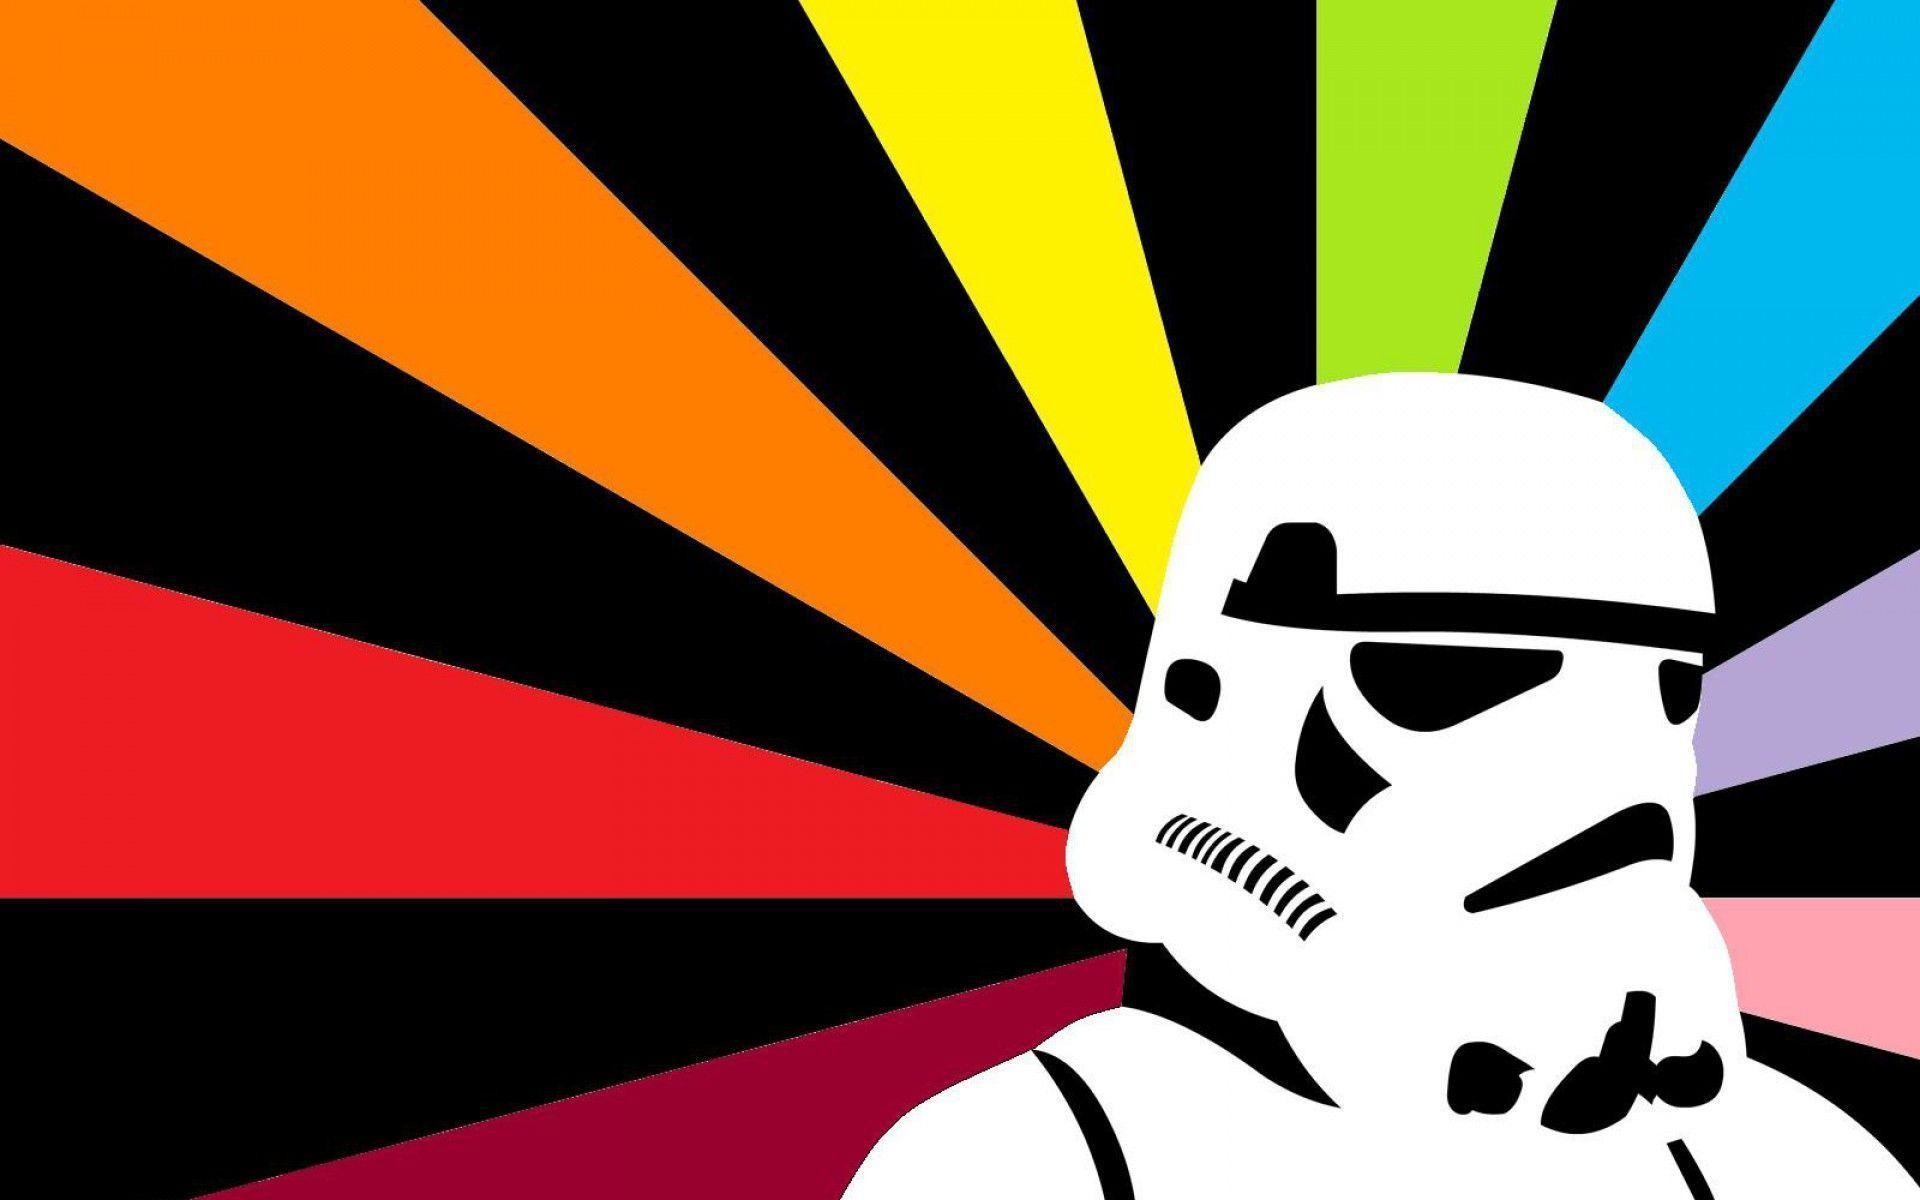 1920x1200 Pin Stormtrooper Wallpaper The Escape 1920x1080 Picture on Pinterest